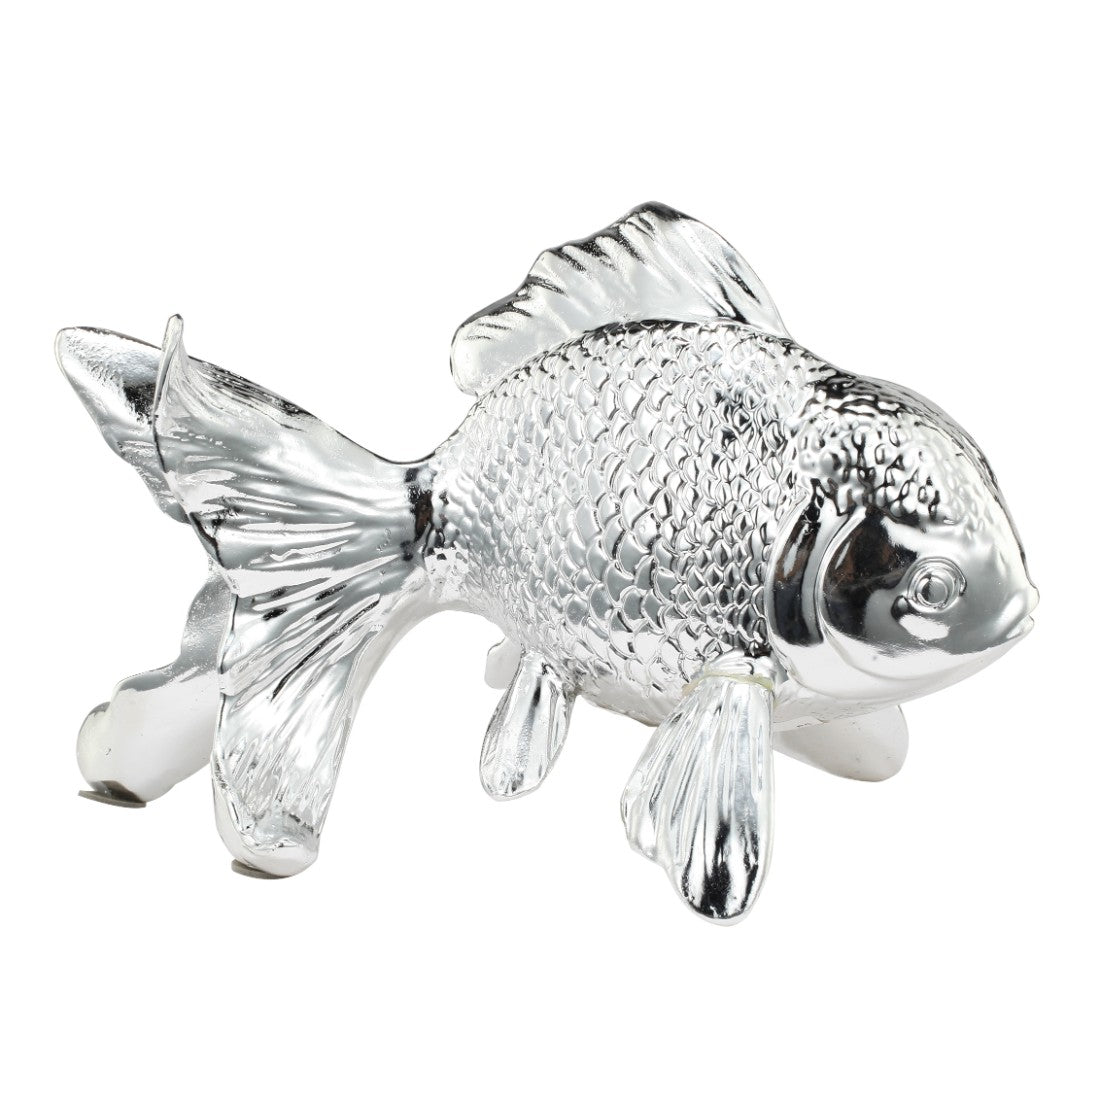 MR. Limpert resin fish figurine/ Small – Lux and Willow Interiors